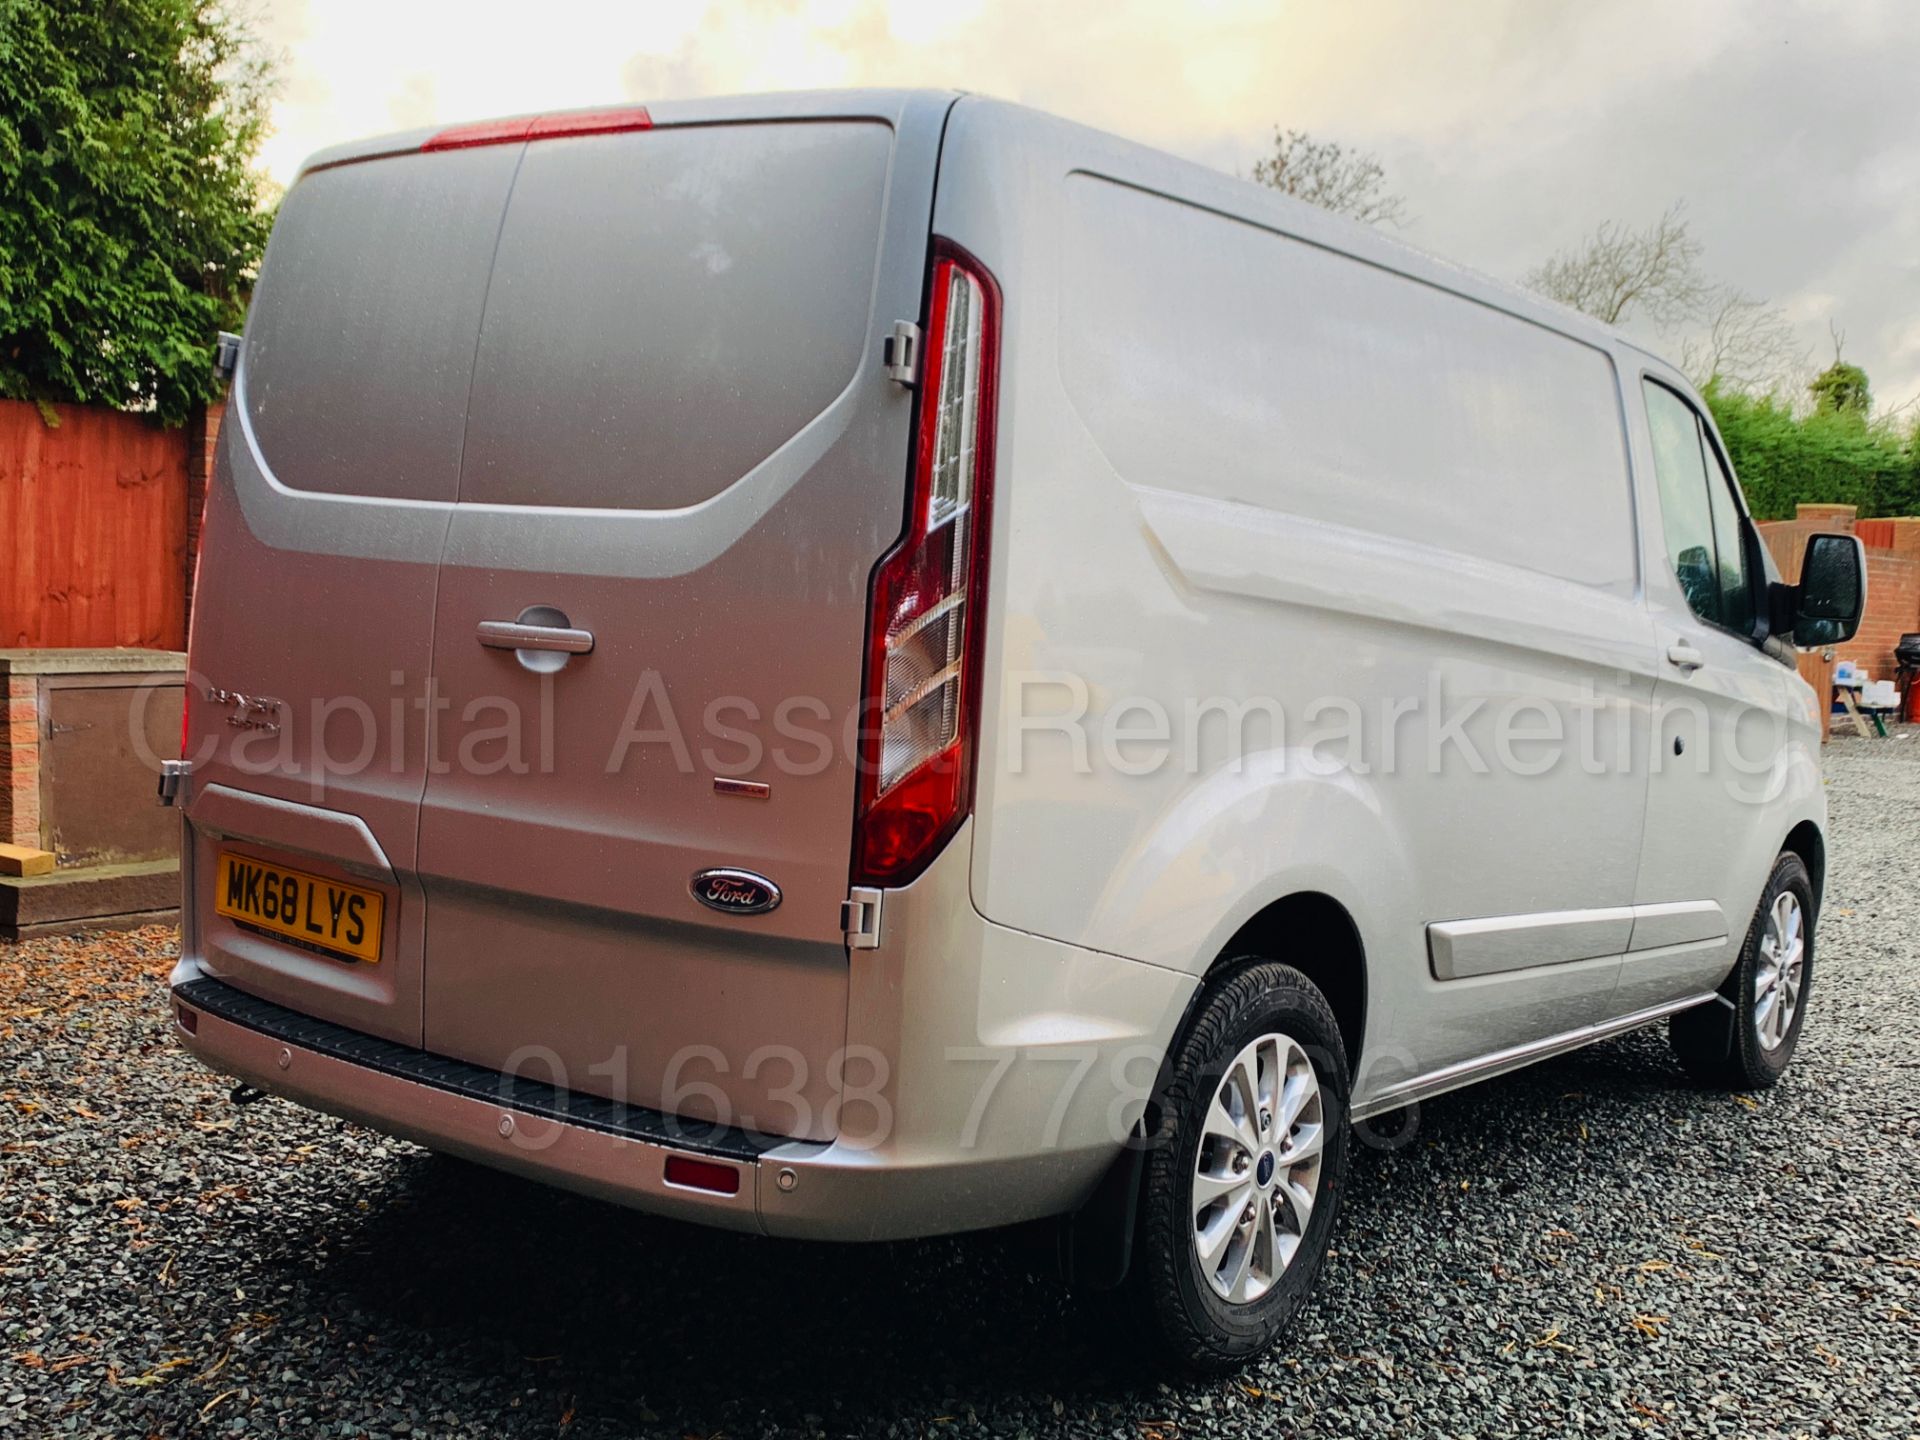 FORD TRANSIT CUSTOM *LIMITED EDTION* (2018 - 68 REG) '2.0 TDCI - 130 BHP - 6 SPEED' *ALL NEW MODEL* - Image 13 of 51